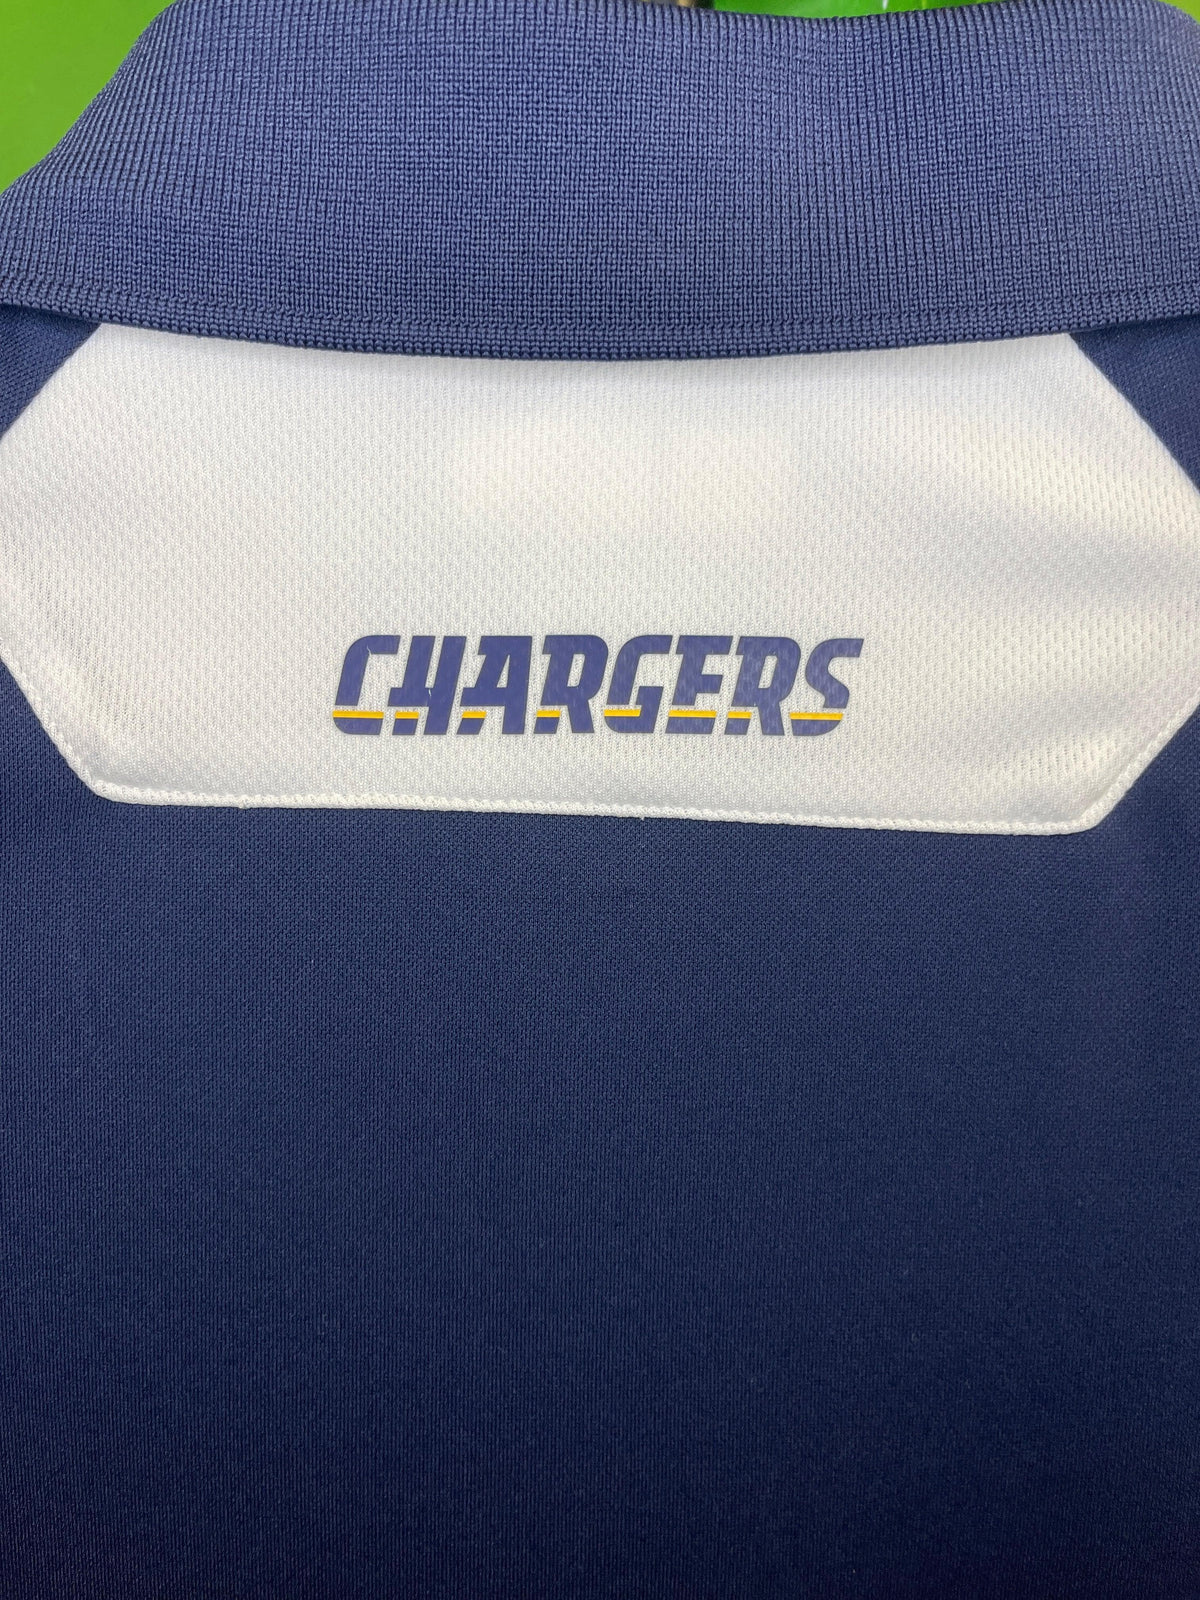 NFL Los Angeles Chargers Wicking Polo Golf Shirt Men's Large